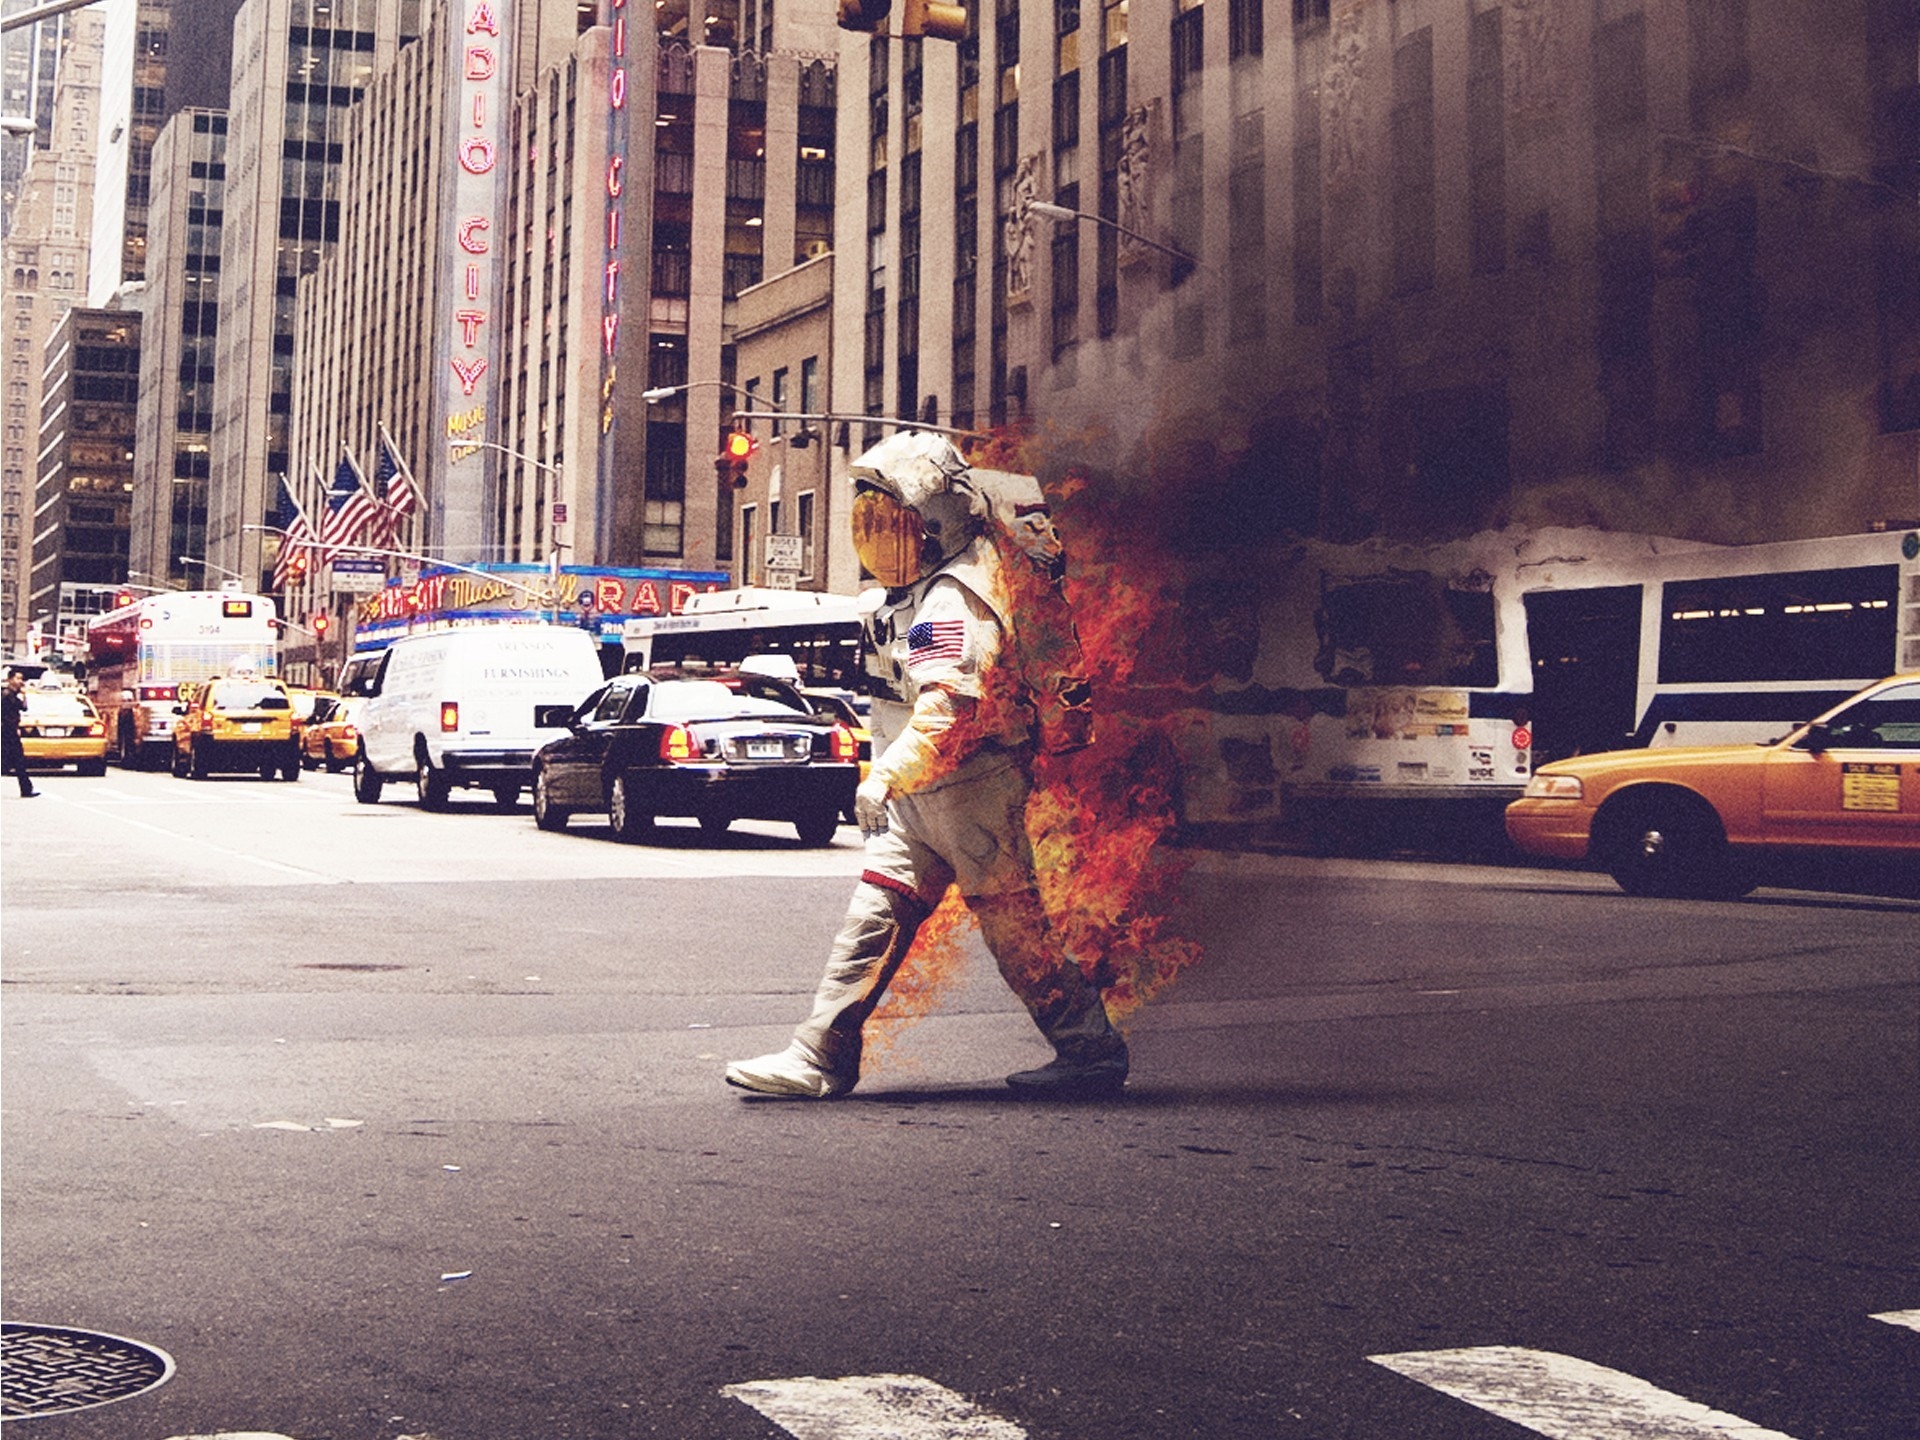 Download Wallpaper, Download cityscapes streets fire nasa astronauts roads american flag on fire jack crossing 1920x1440 wallp People HD Wallpaper, Hi Res People Wallpaper, High Definition Wallpaper